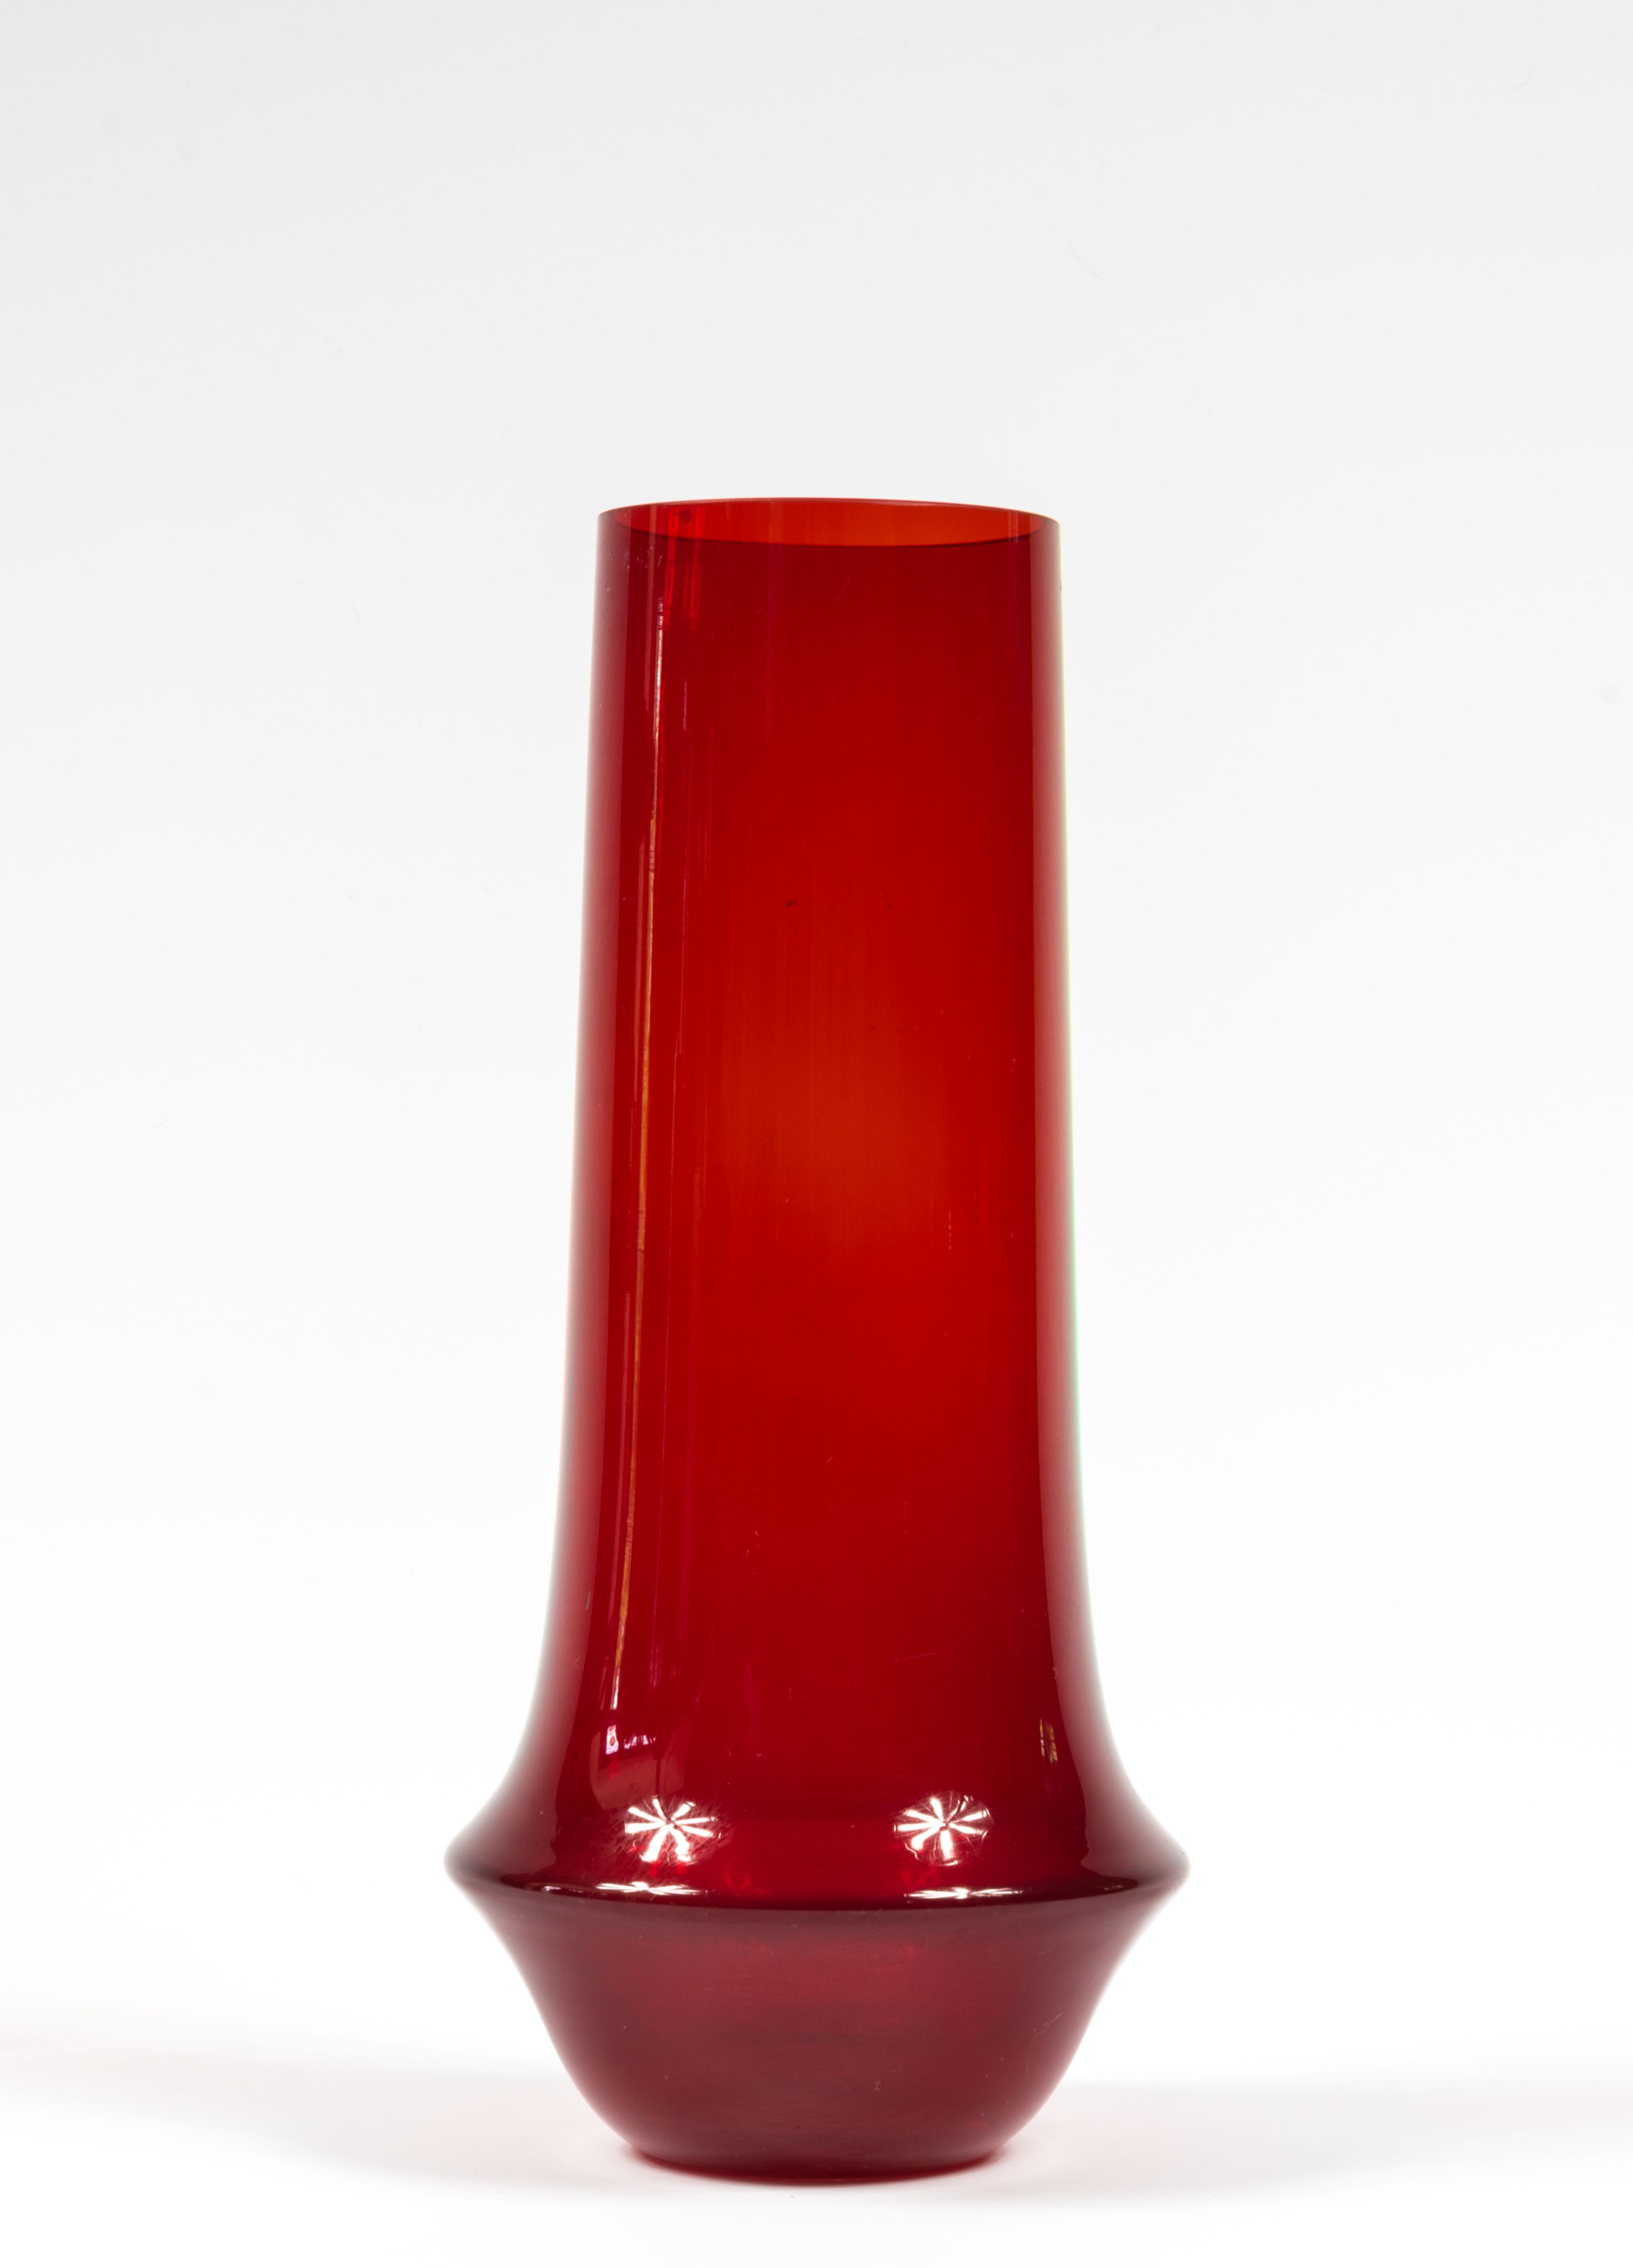 18 attractive Large Clear Glass Cylinder Vases 2023 free download large clear glass cylinder vases of riihimac2a4en lasi oy riihimaki red glass vase by tamara aladin in large scandinavian red glass vase designed by tamara aladin c1963 for riihimaki riihima